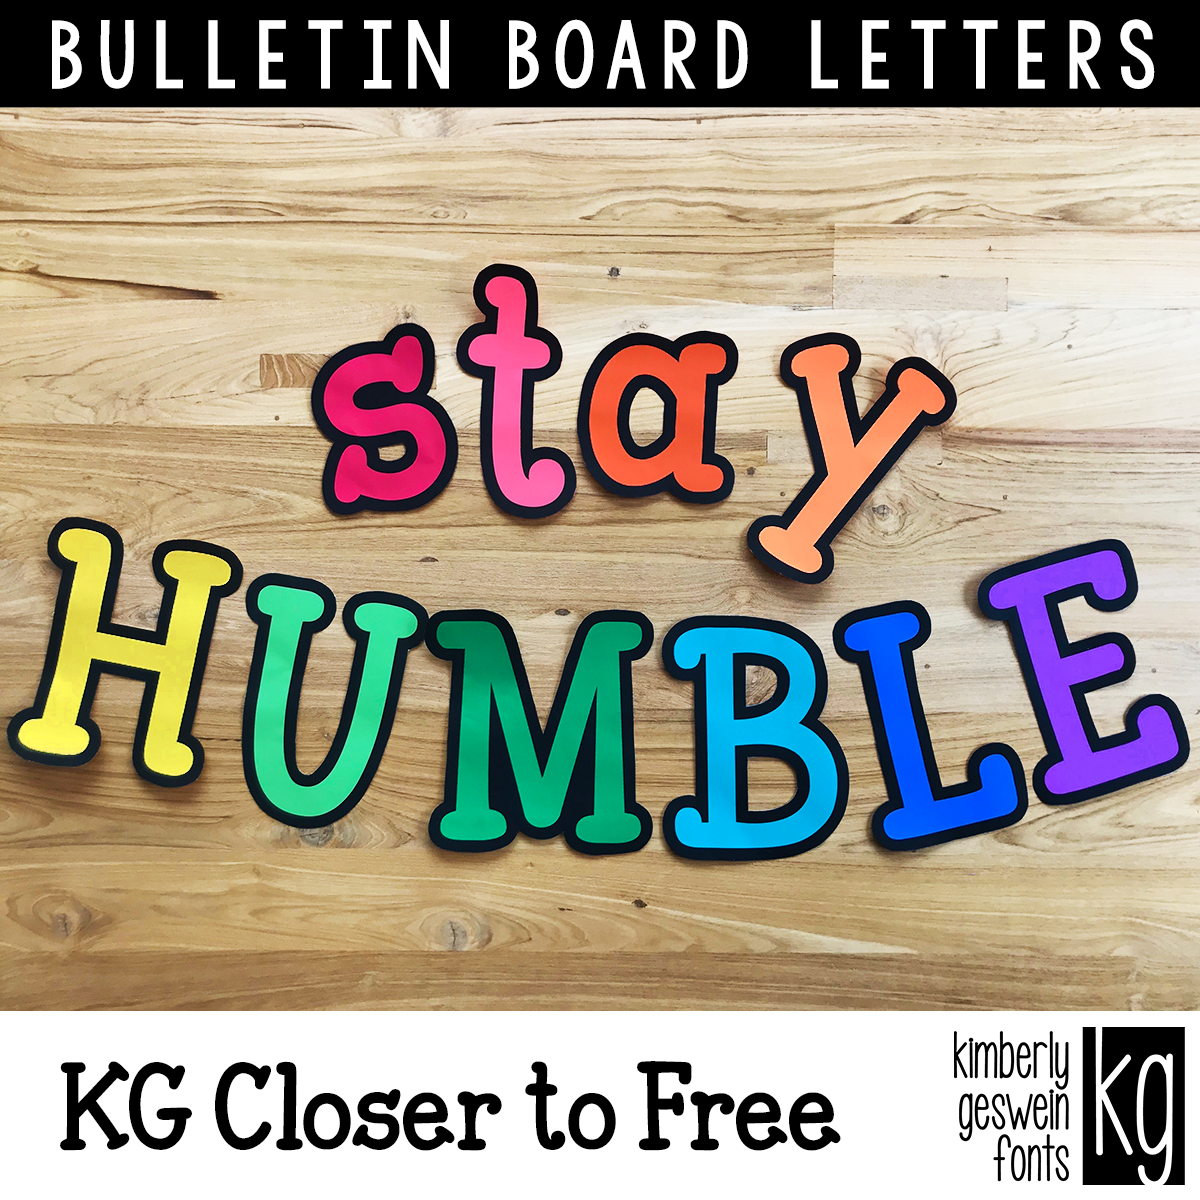 How to Store Bulletin Board Letters and Cutouts